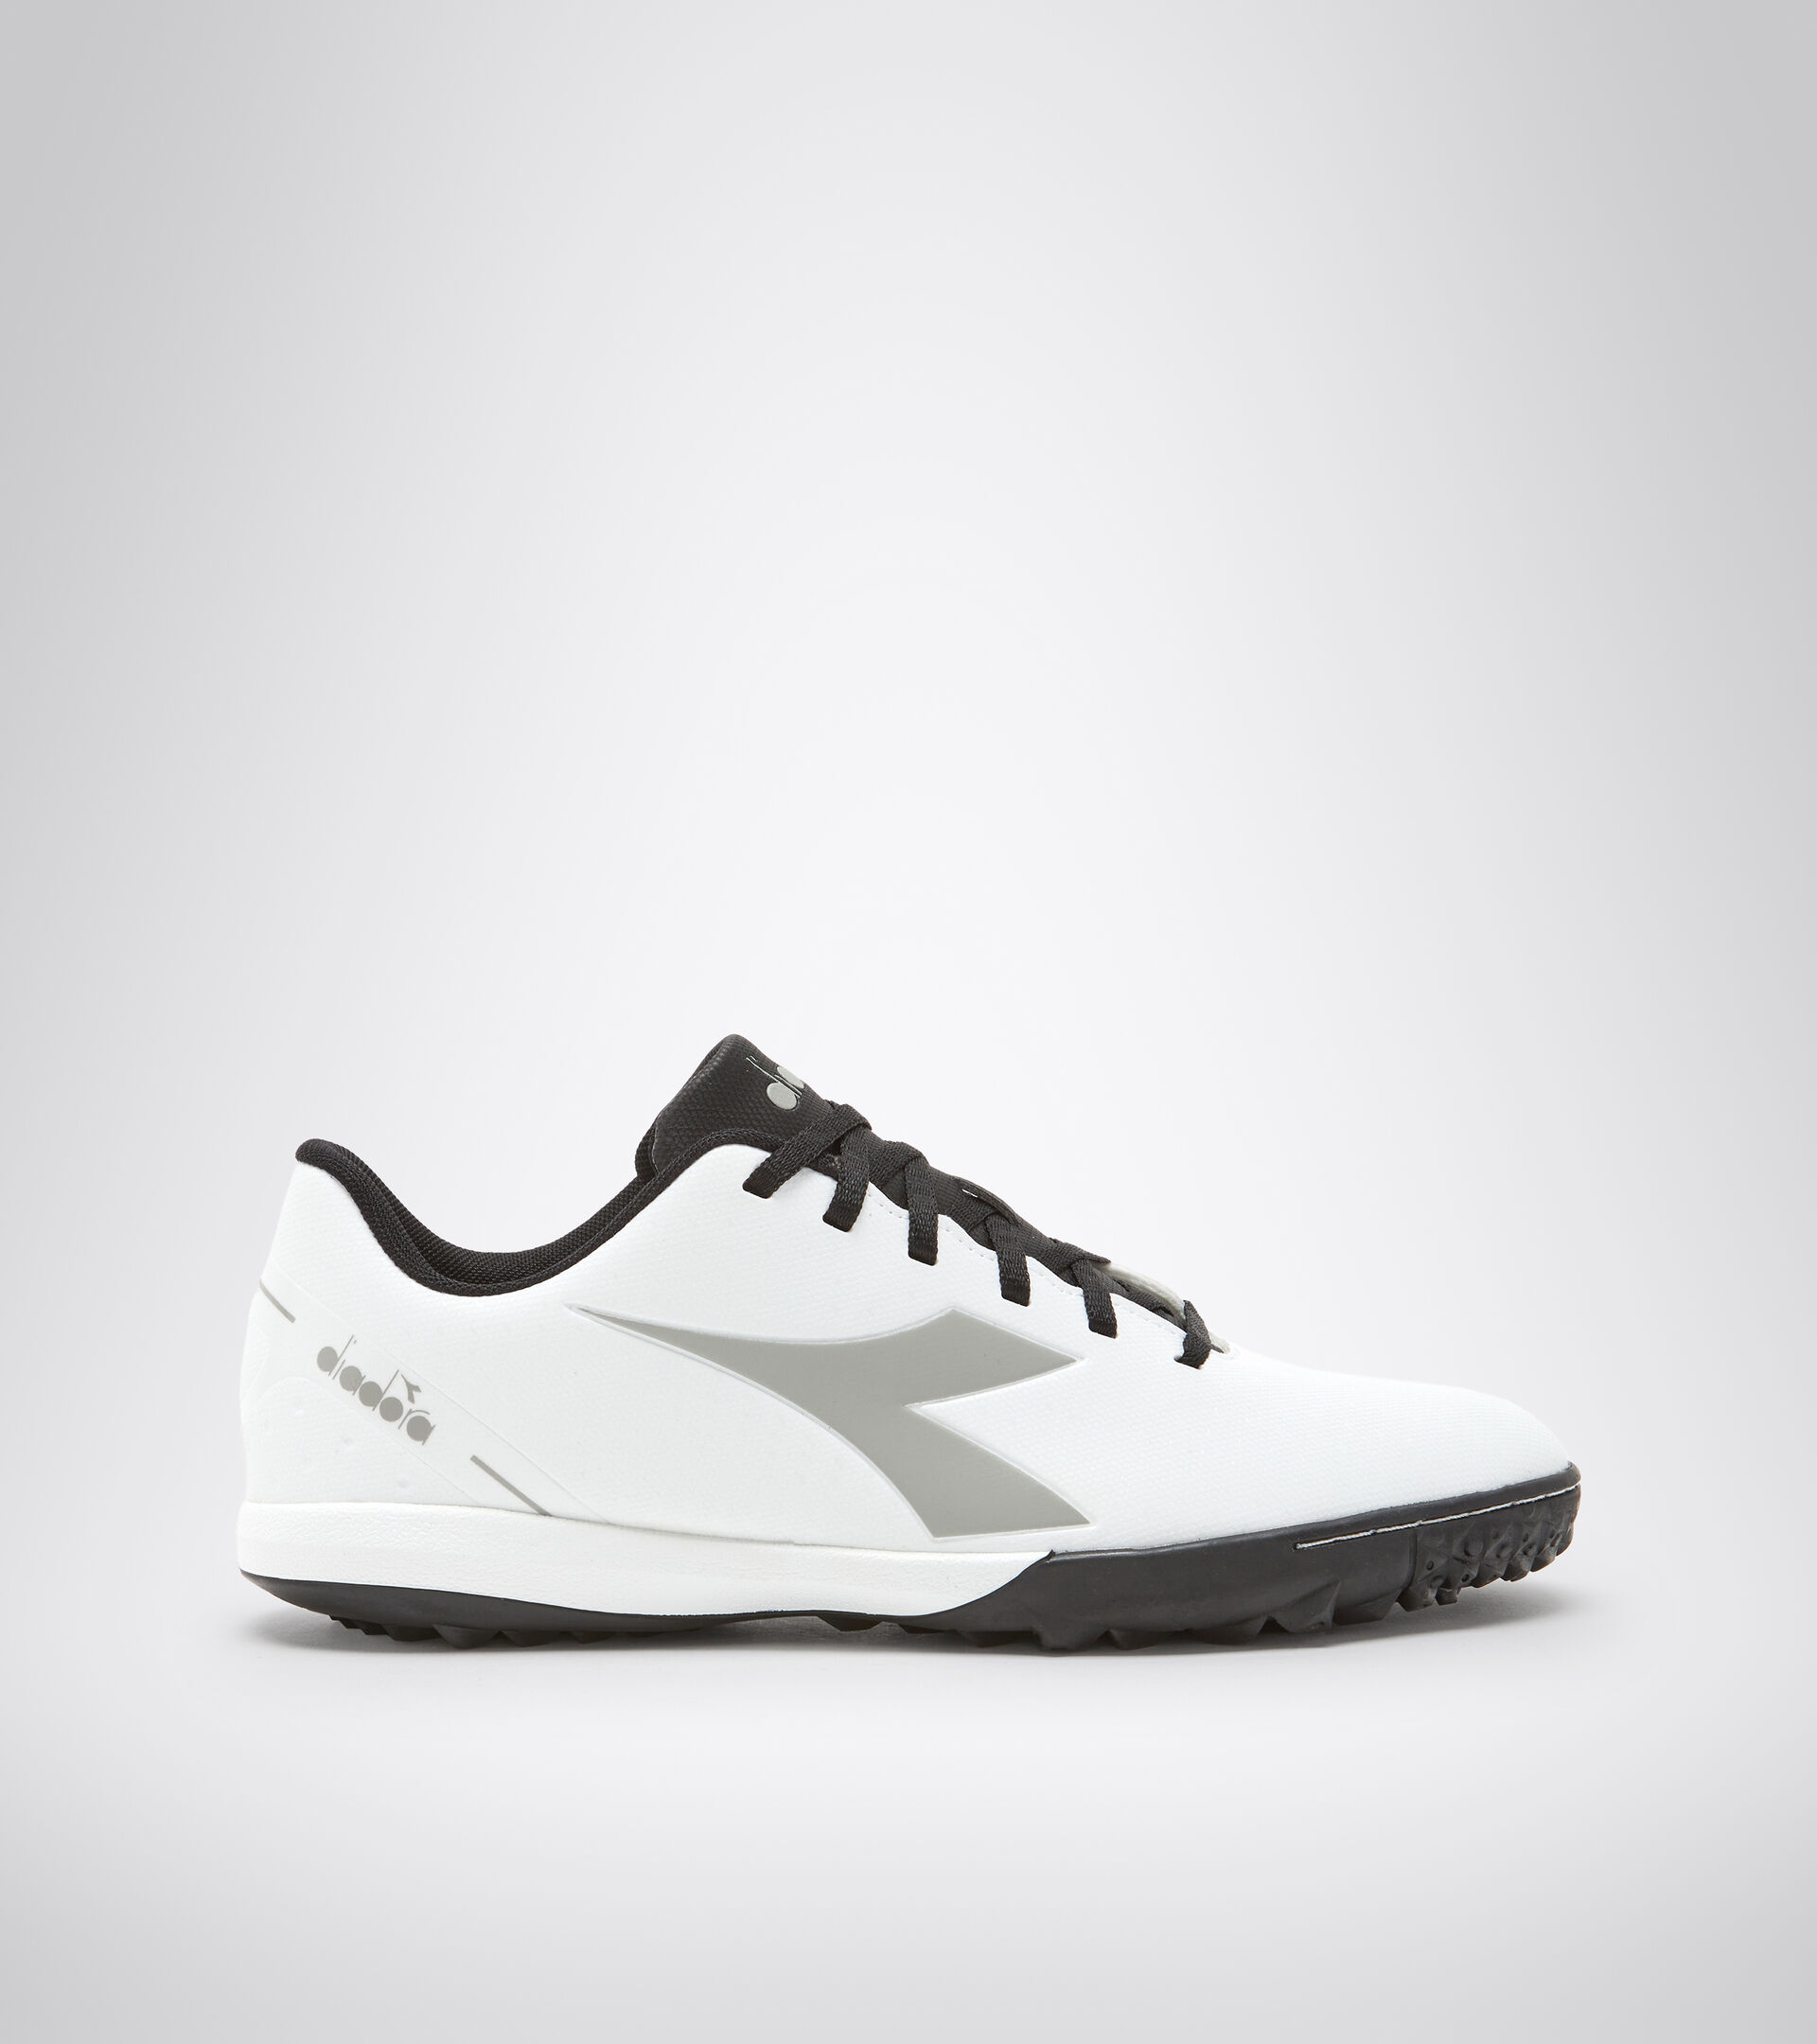 Futsal boot - Specific outsole for synthetic/hard grounds PICHICHI 5 TFR WHITE/COOL GRAY/BLACK - Diadora